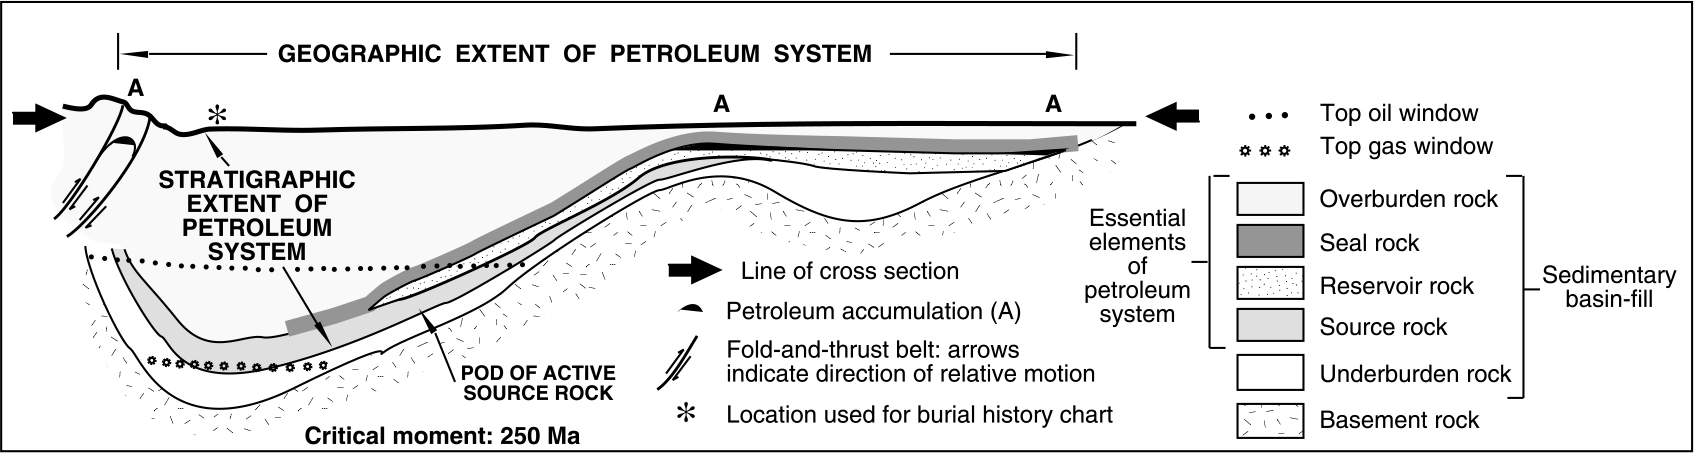 Schematic of a petroleum system (Magoon and Beaumont, 1994)